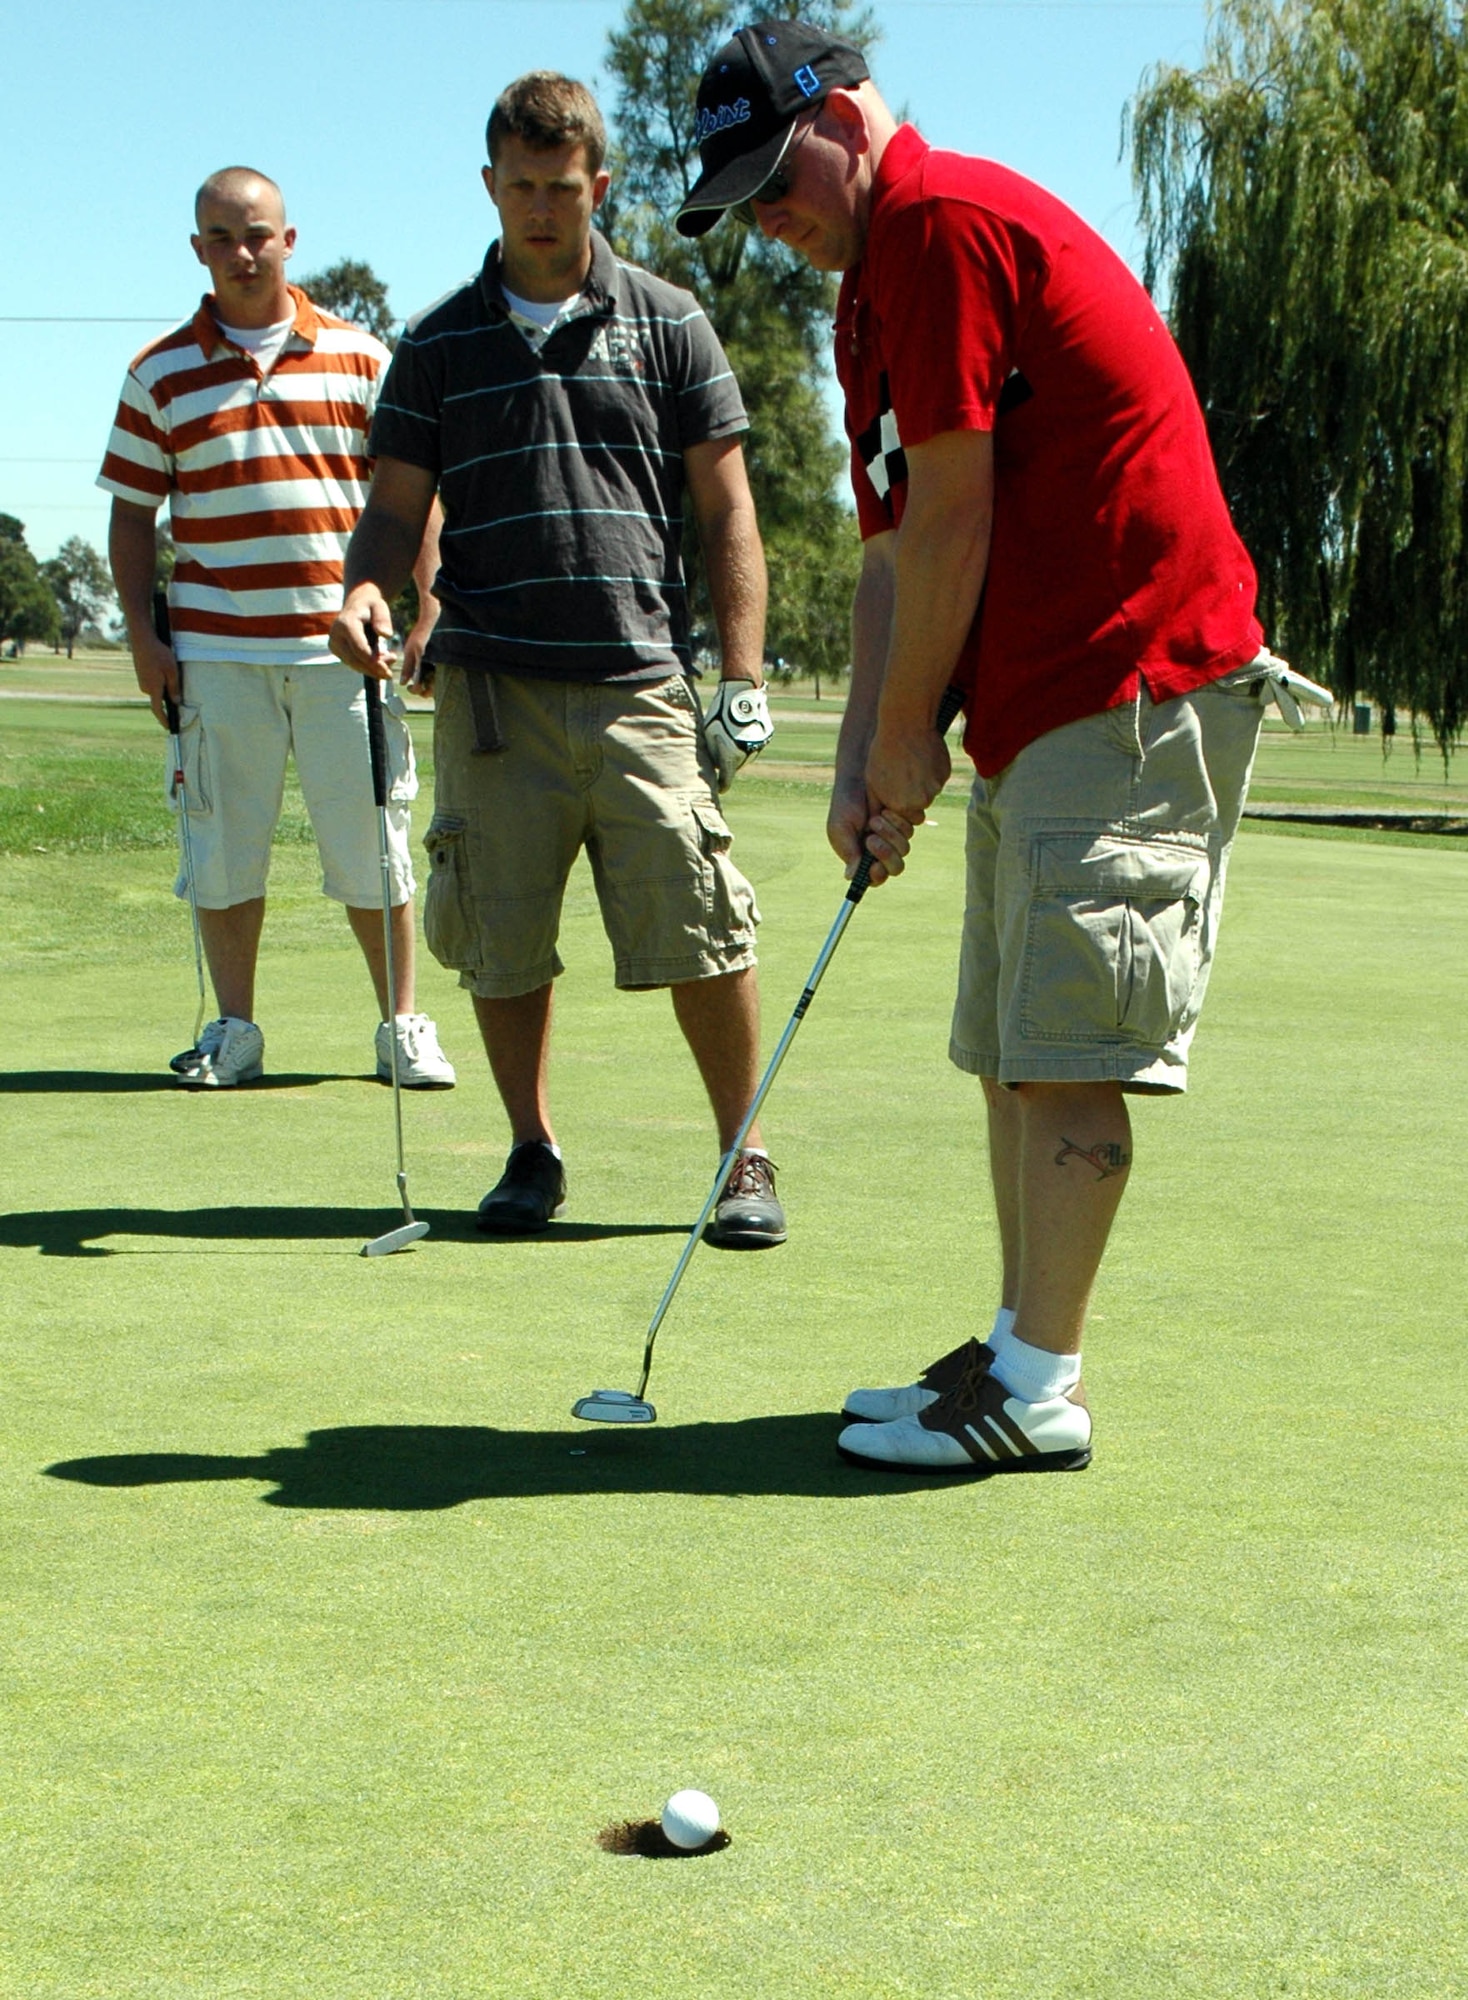 Austin Bridwell, (red shirt), along with teammates Dustin Brown, (far left), and Matthew Brattoli, watch as Bridwell sinks his birdie putt during the 60th Air Force Anniversary Golf Tournament at the Cypress Lakes Golf Course Aug. 17. The tournament was a four-man scramble format and the winning team was awarded Sky Caddie II GPS units, along with other prizes. (U.S. Air Force photo/Staff Sgt. Candy Knight)